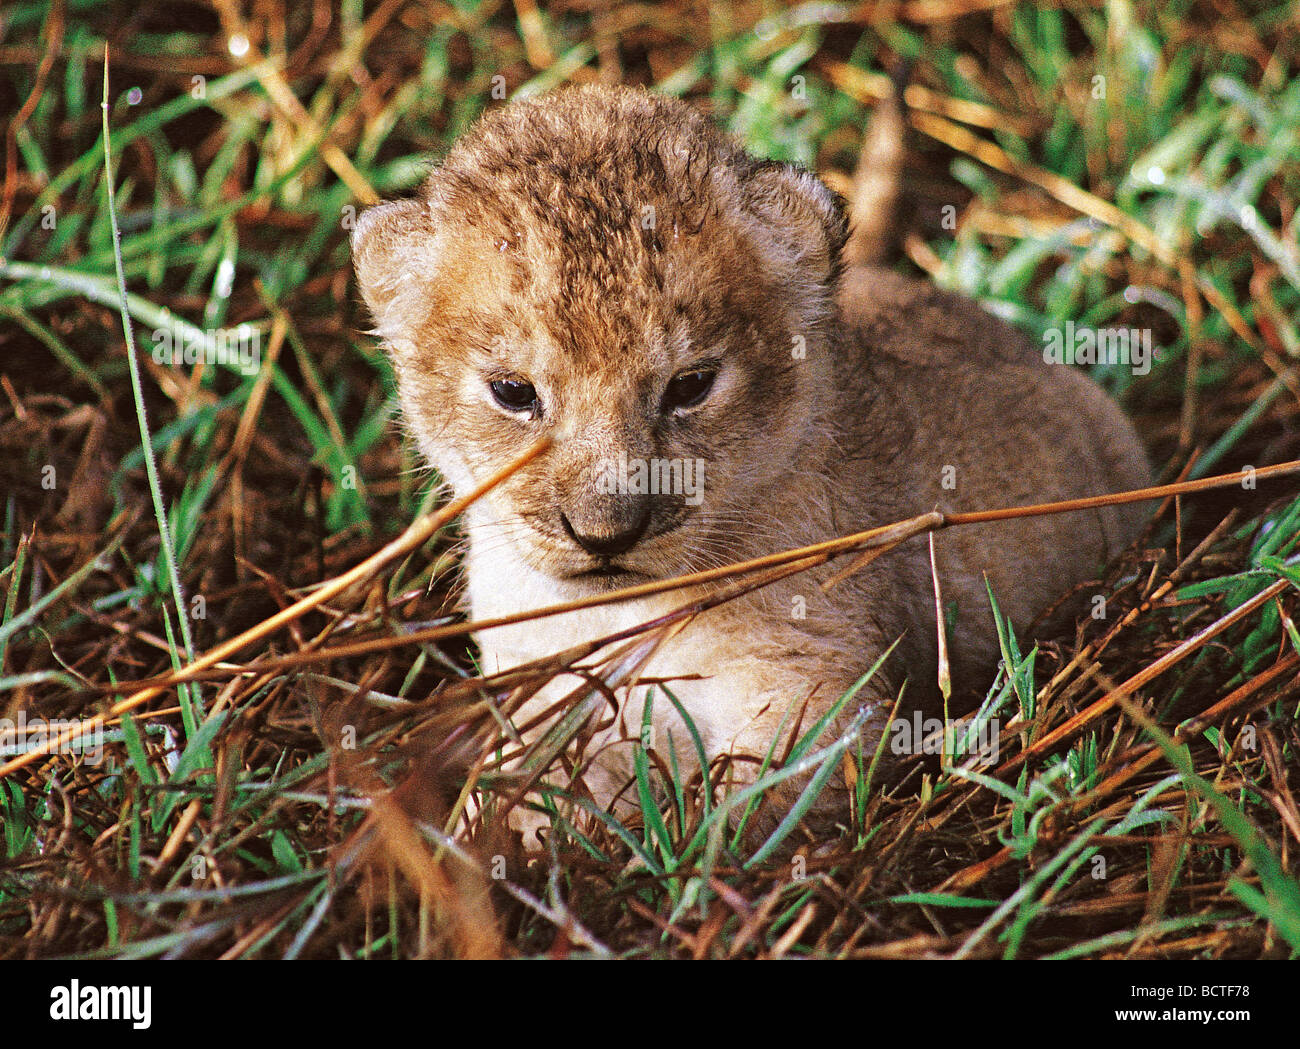 Tiny Lion cub about one week old hiding in long grass Masai Mara National Reserve Kenya East Africa Stock Photo